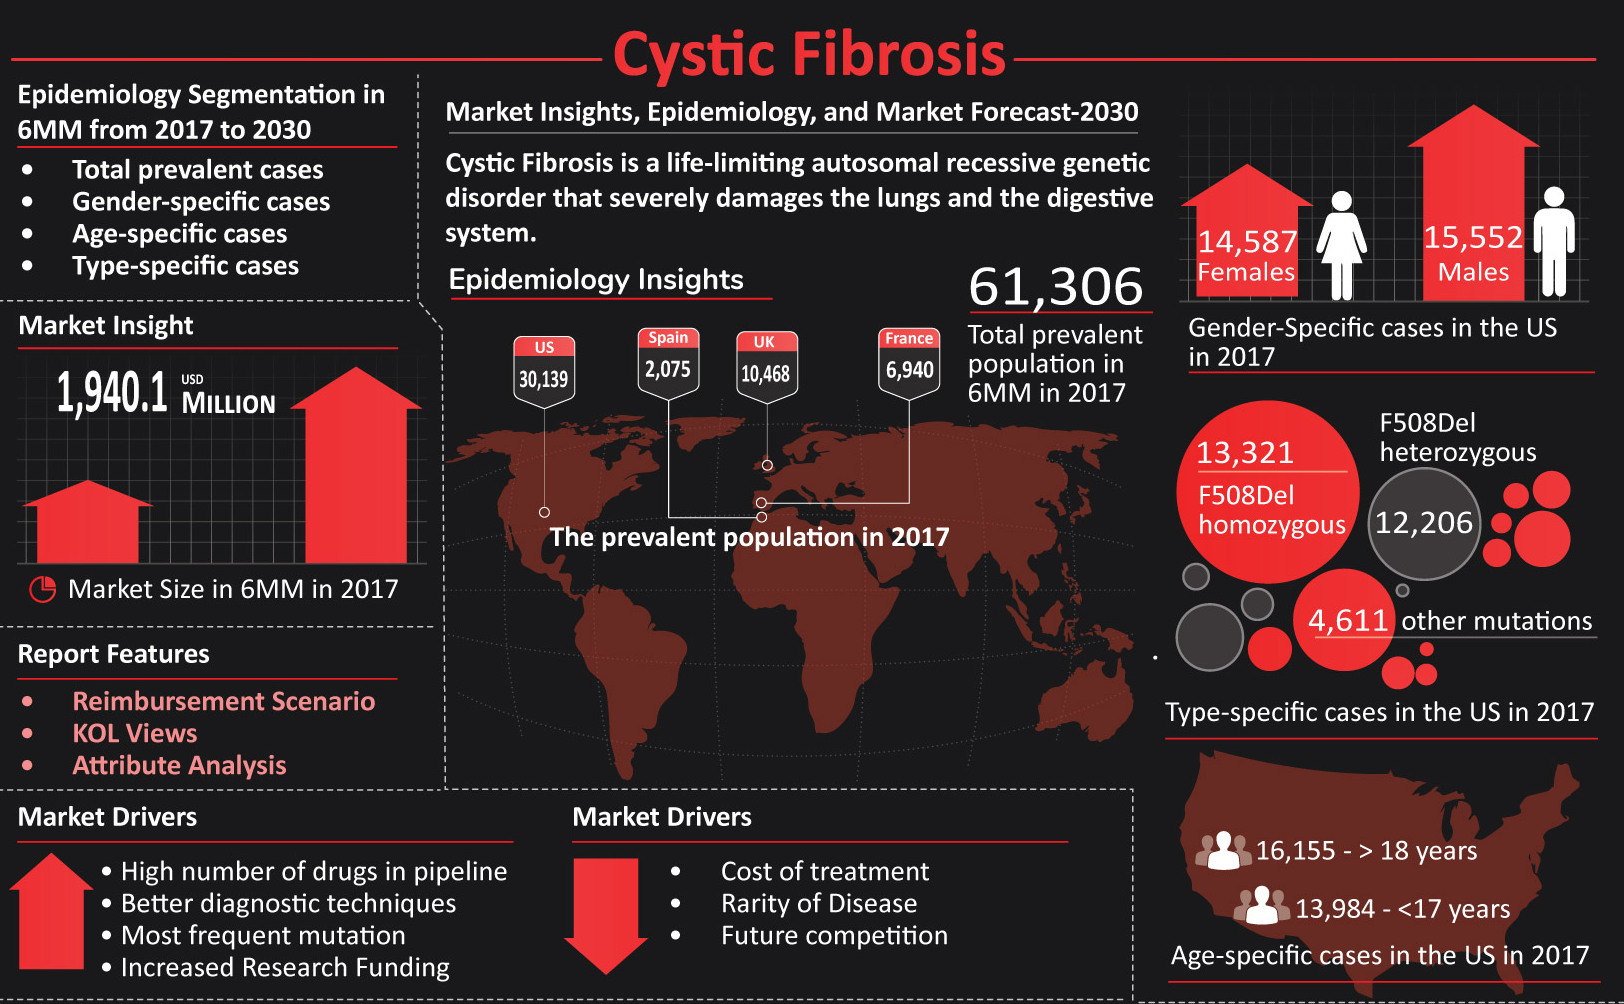 Cystic Fibrosis Market Insights and Market Forecast by DelveInsight